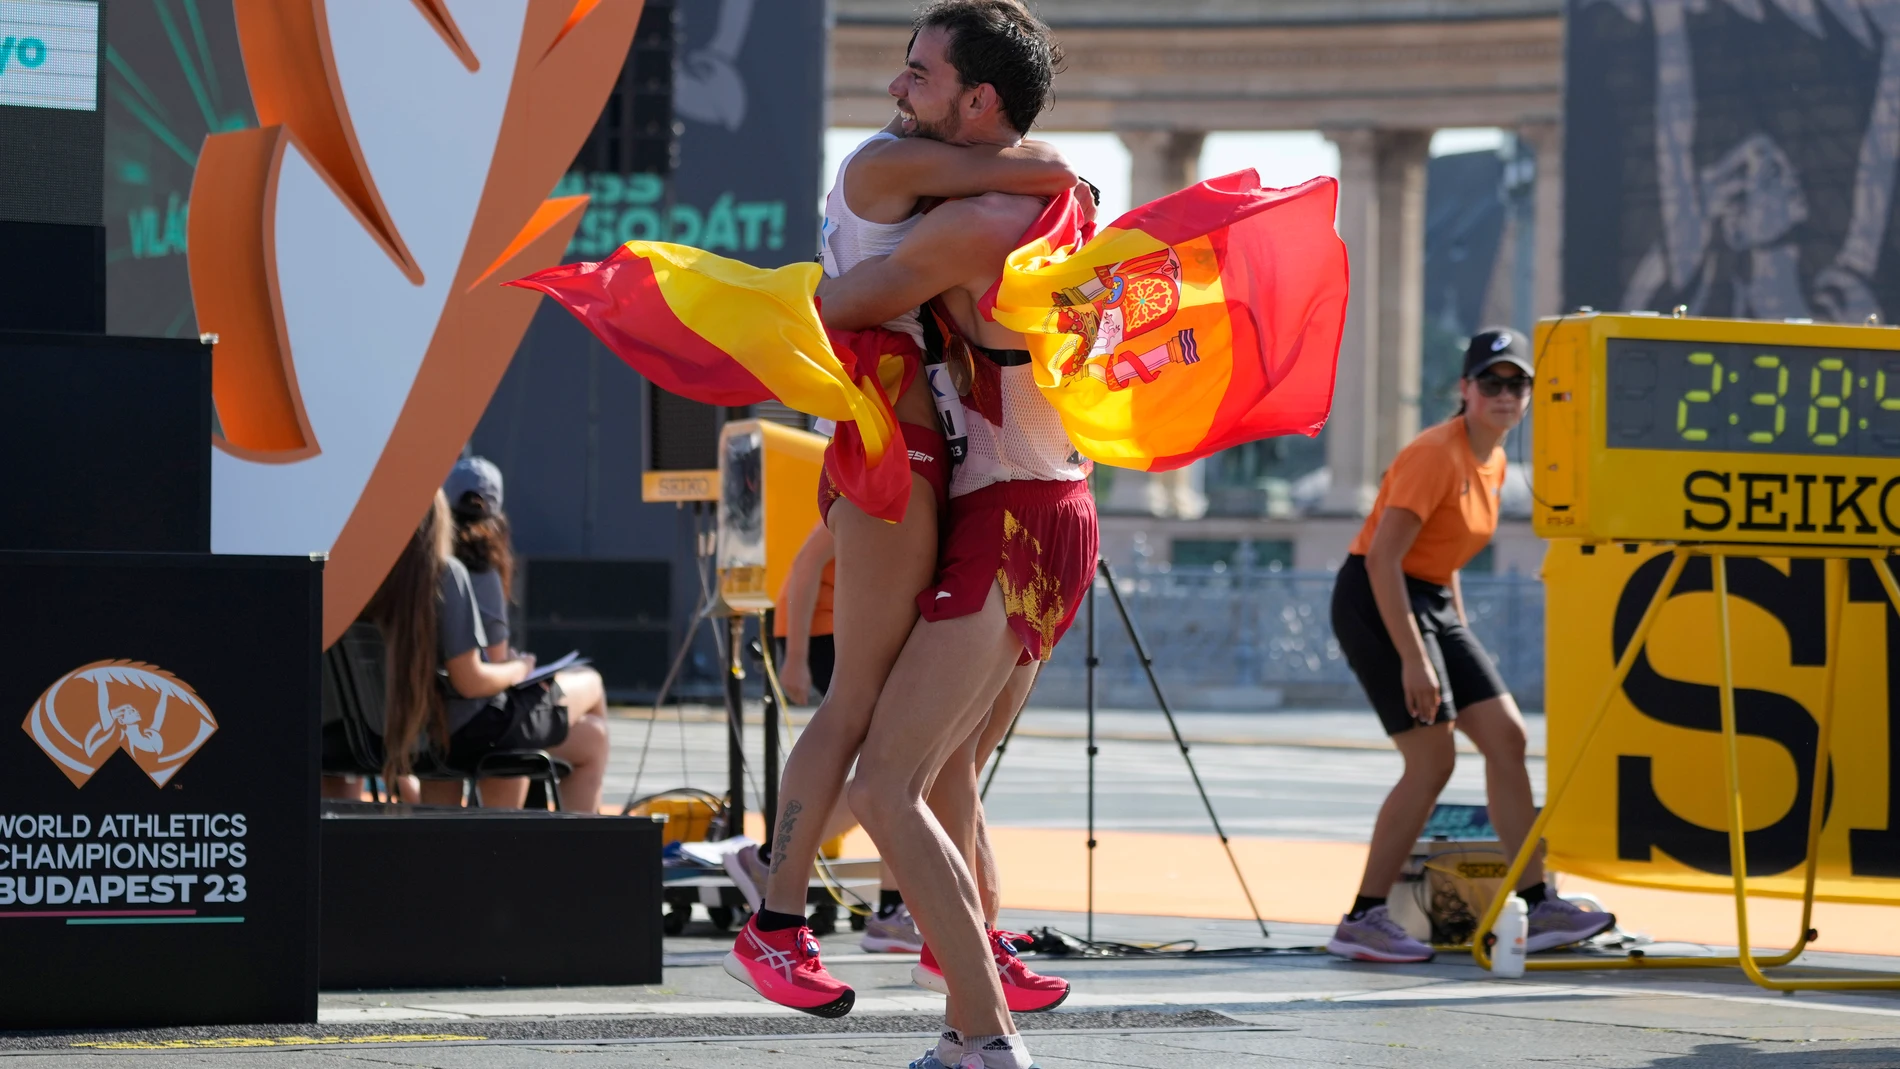 Alvaro Martin, of Spain, right, embraces his compatriot María Perez after winning the men's and women's 35-kilometer race walk during the World Athletics Championships in Budapest, Hungary, Thursday, Aug. 24, 2023. (AP Photo/Ashley Landis)